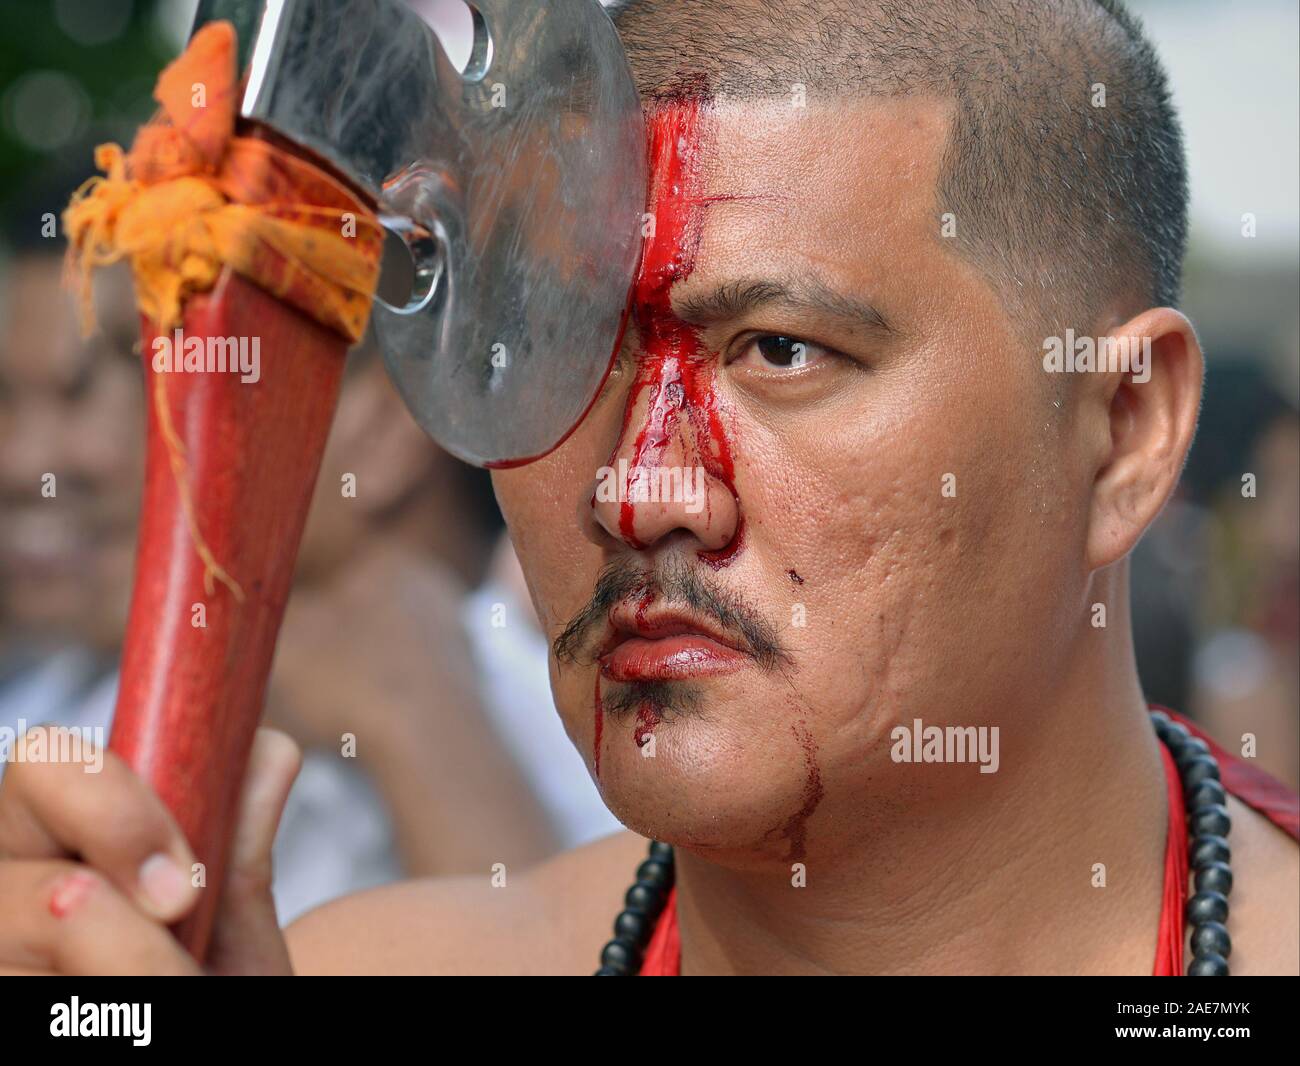 Thai Chinese Taoist devotee cuts his forehead with a sharp axe during the Phuket Vegetarian Festival (Nine Emperor Gods Festival). Stock Photo